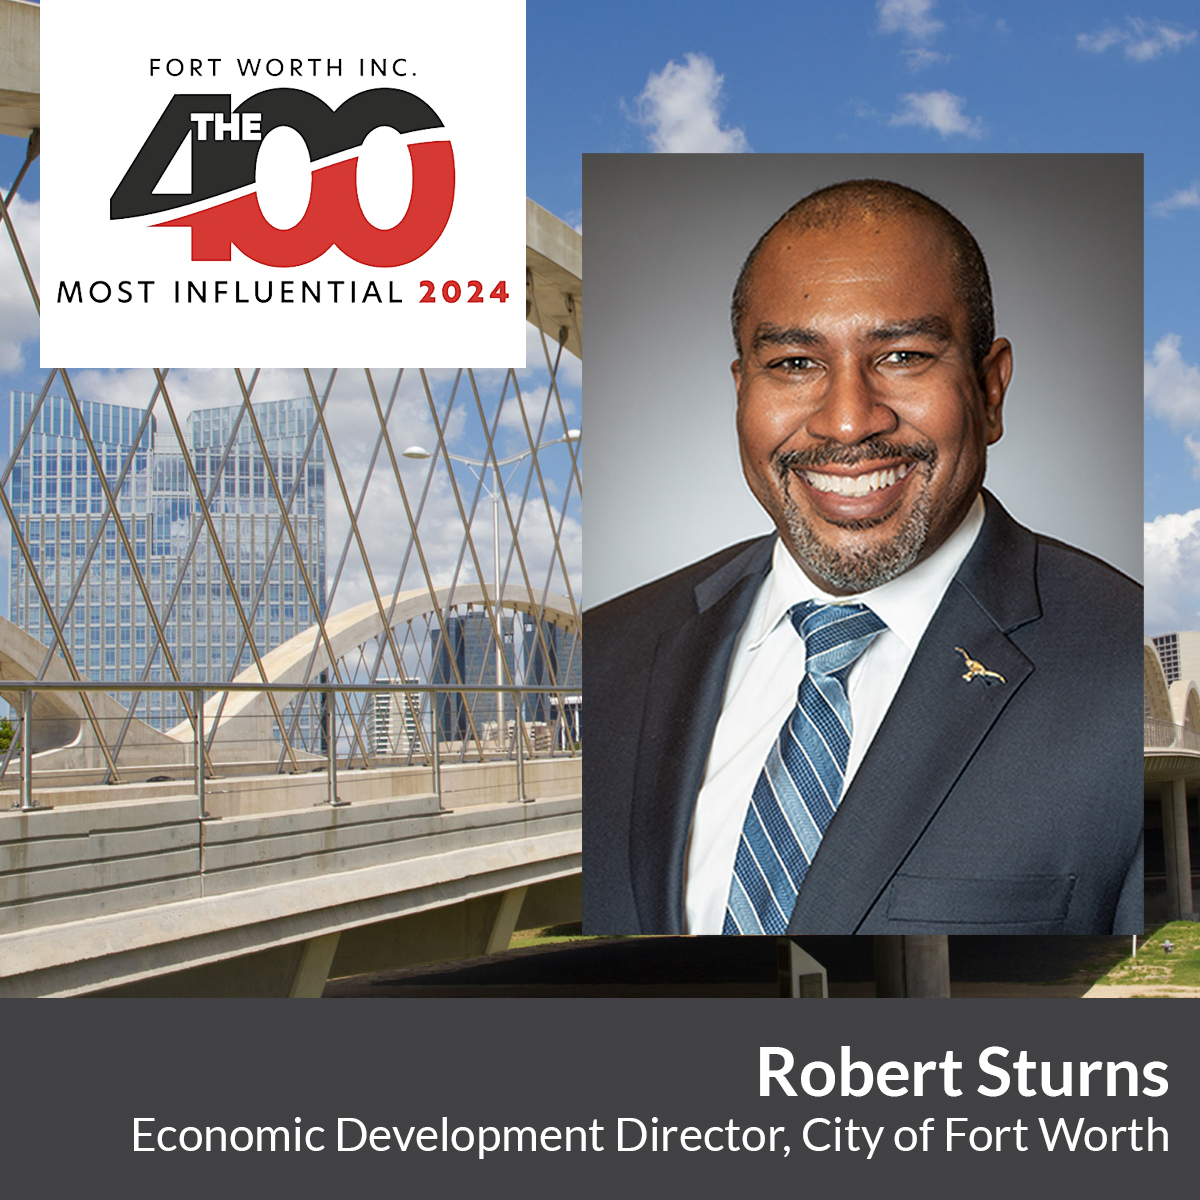 Congratulations to @RobSturns, @FWEconDev Director, on being recognized by @FWincmag as one of the '400 Most Influential People' in #FortWorth! 👏